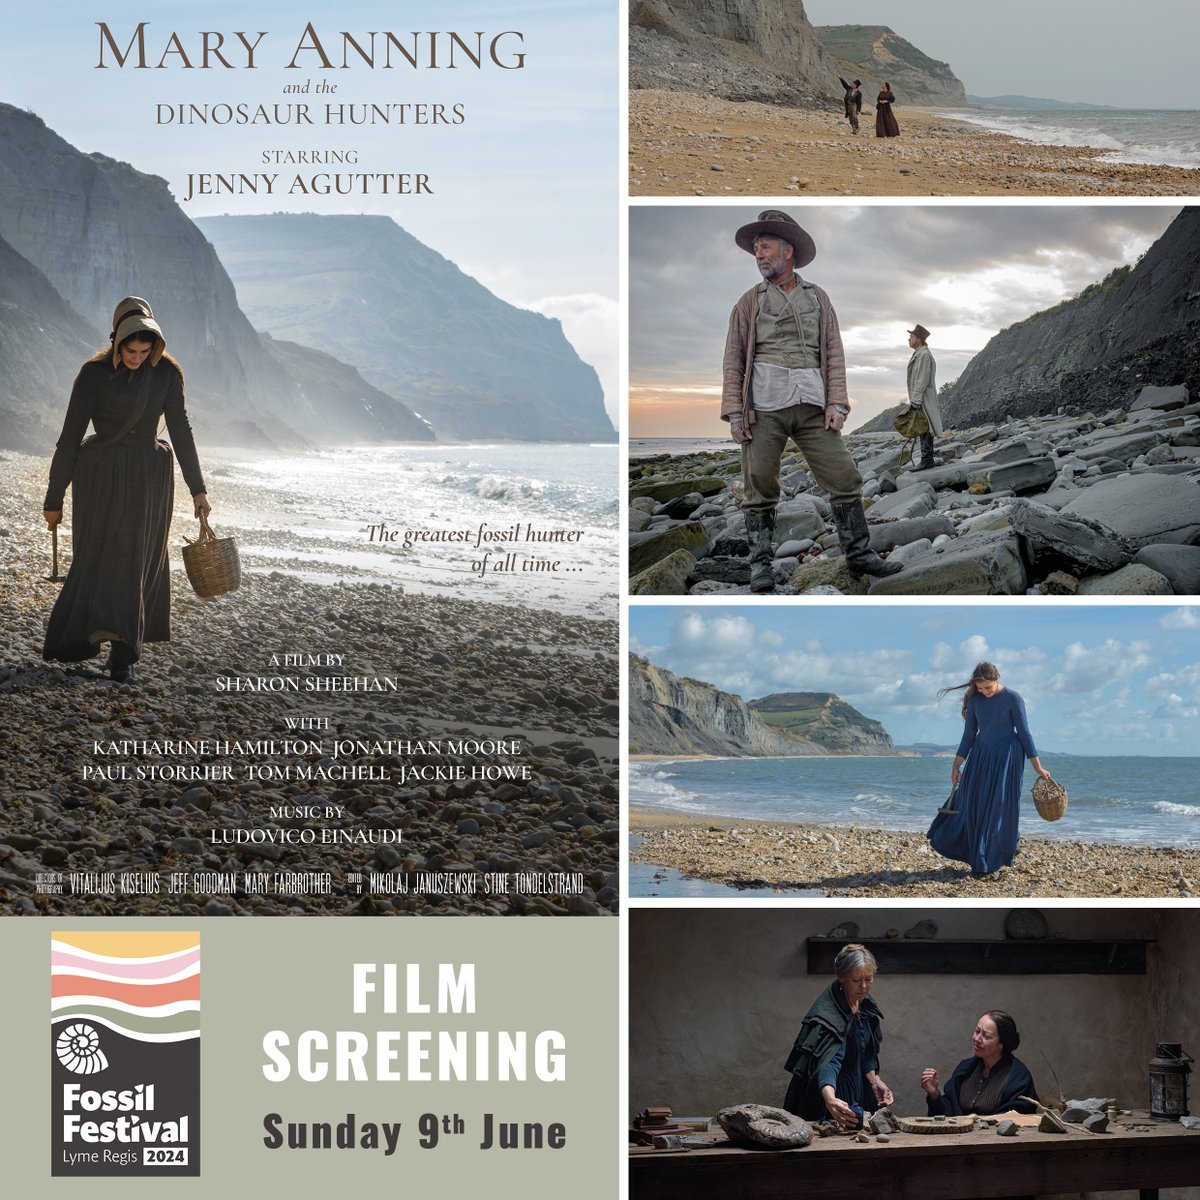 Fossil Festival 📷FILM SCREENING at The Marine Theatre - MARY ANNING AND THE DINOSAUR HUNTERS - Sunday 9th June, 6.15pm. Be amongst the first to see this much anticipated new film, shot on location in Lyme Regis. For ticket info see link in bio.